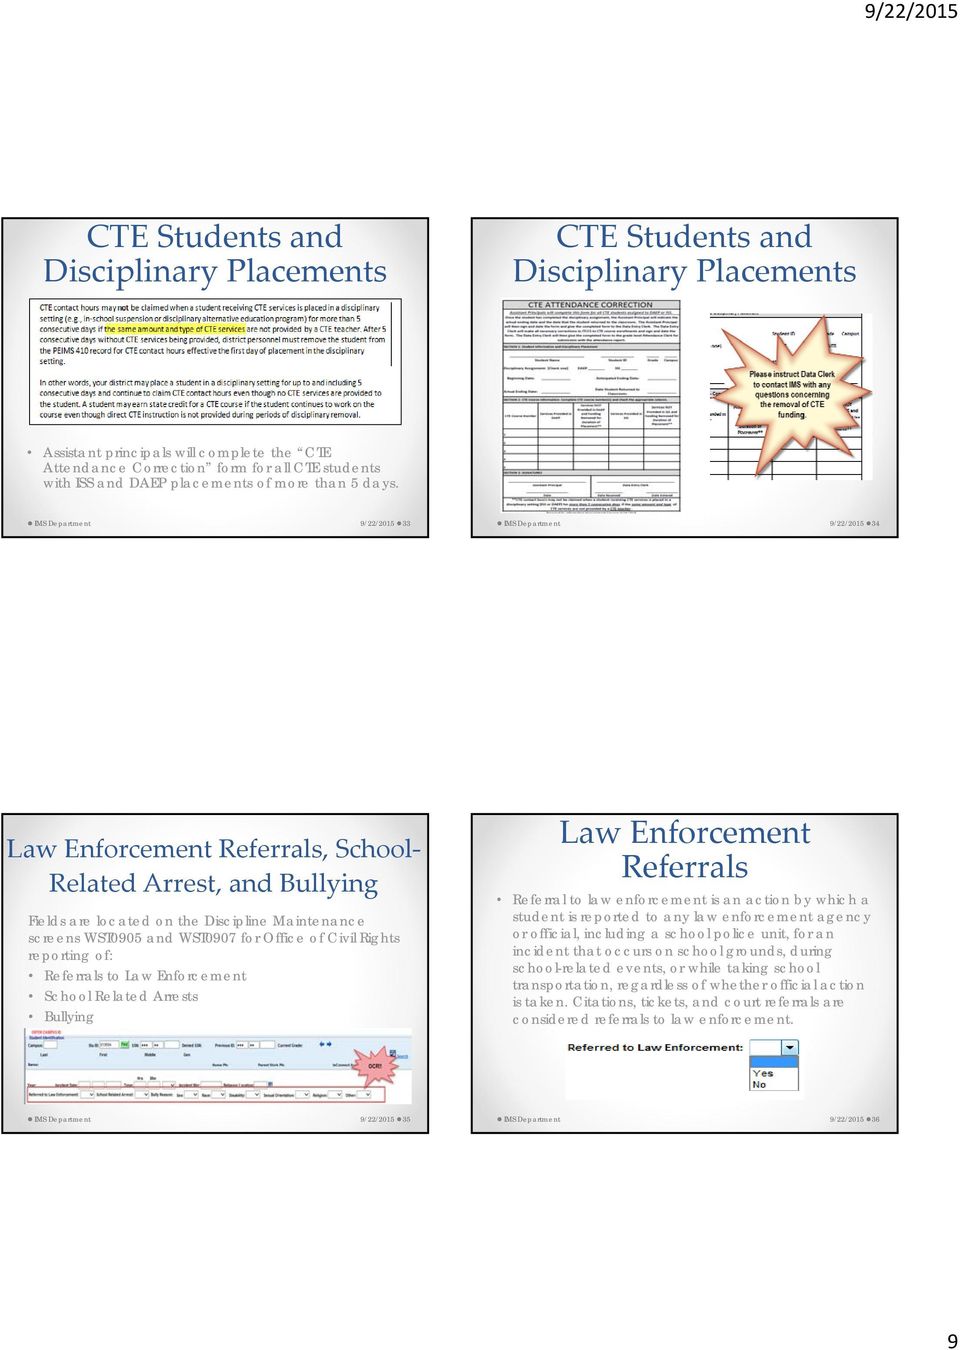 IMS Department 9/22/2015 33 IMS Department 9/22/2015 34 Law Enforcement Referrals, School Related Arrest, and Bullying Fields are located on the Discipline Maintenance screens WST0905 and WST0907 for